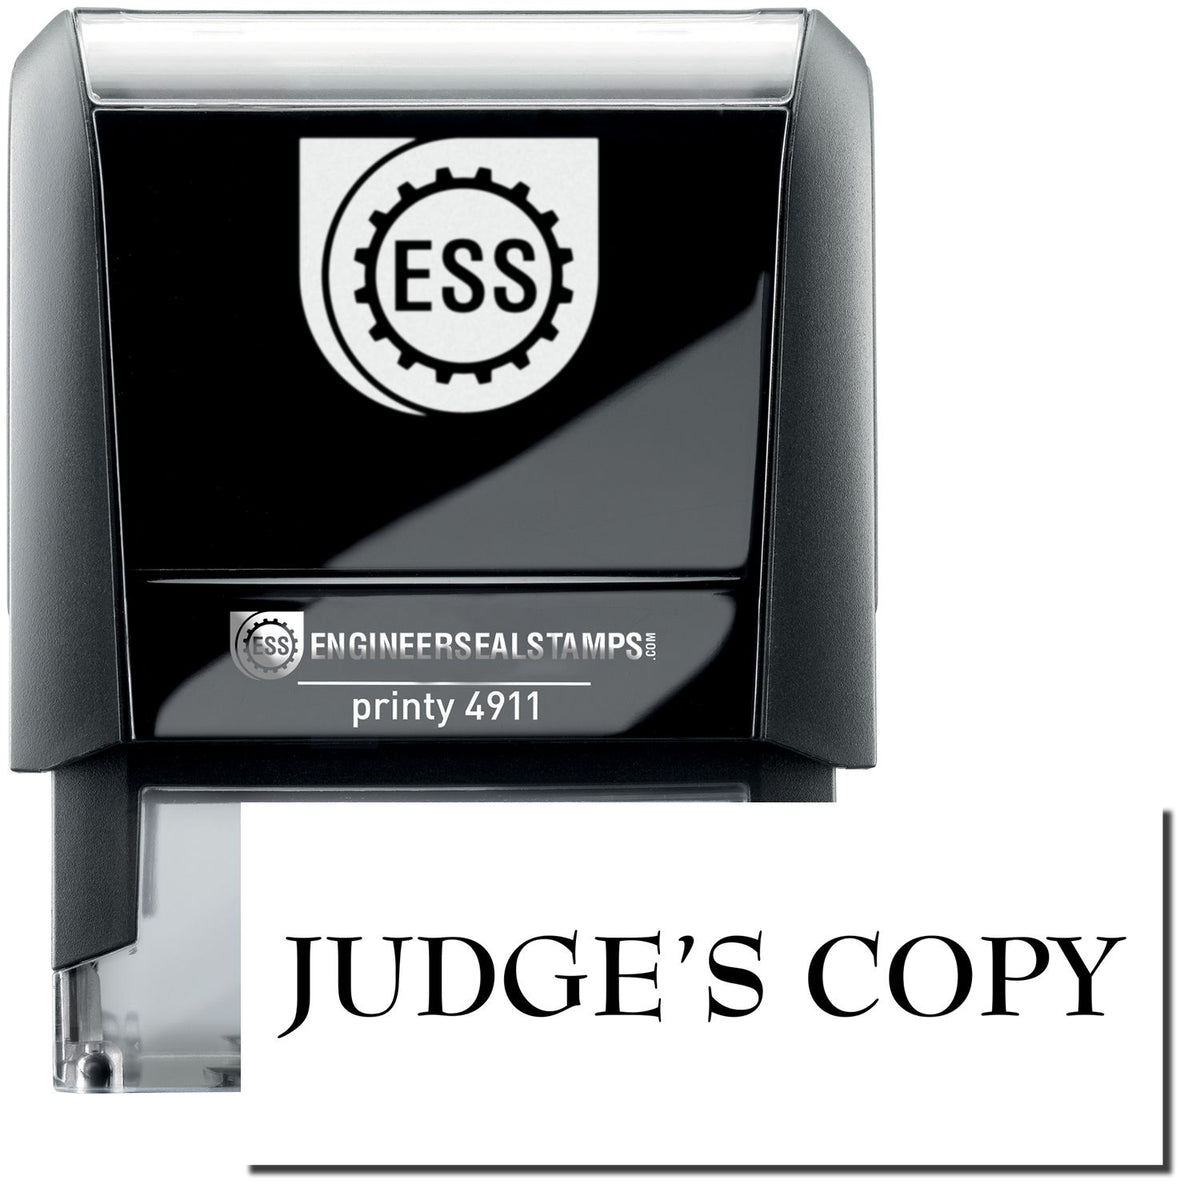 A self-inking stamp with a stamped image showing how the text &quot;JUDGE&#39;S COPY&quot; is displayed after stamping.